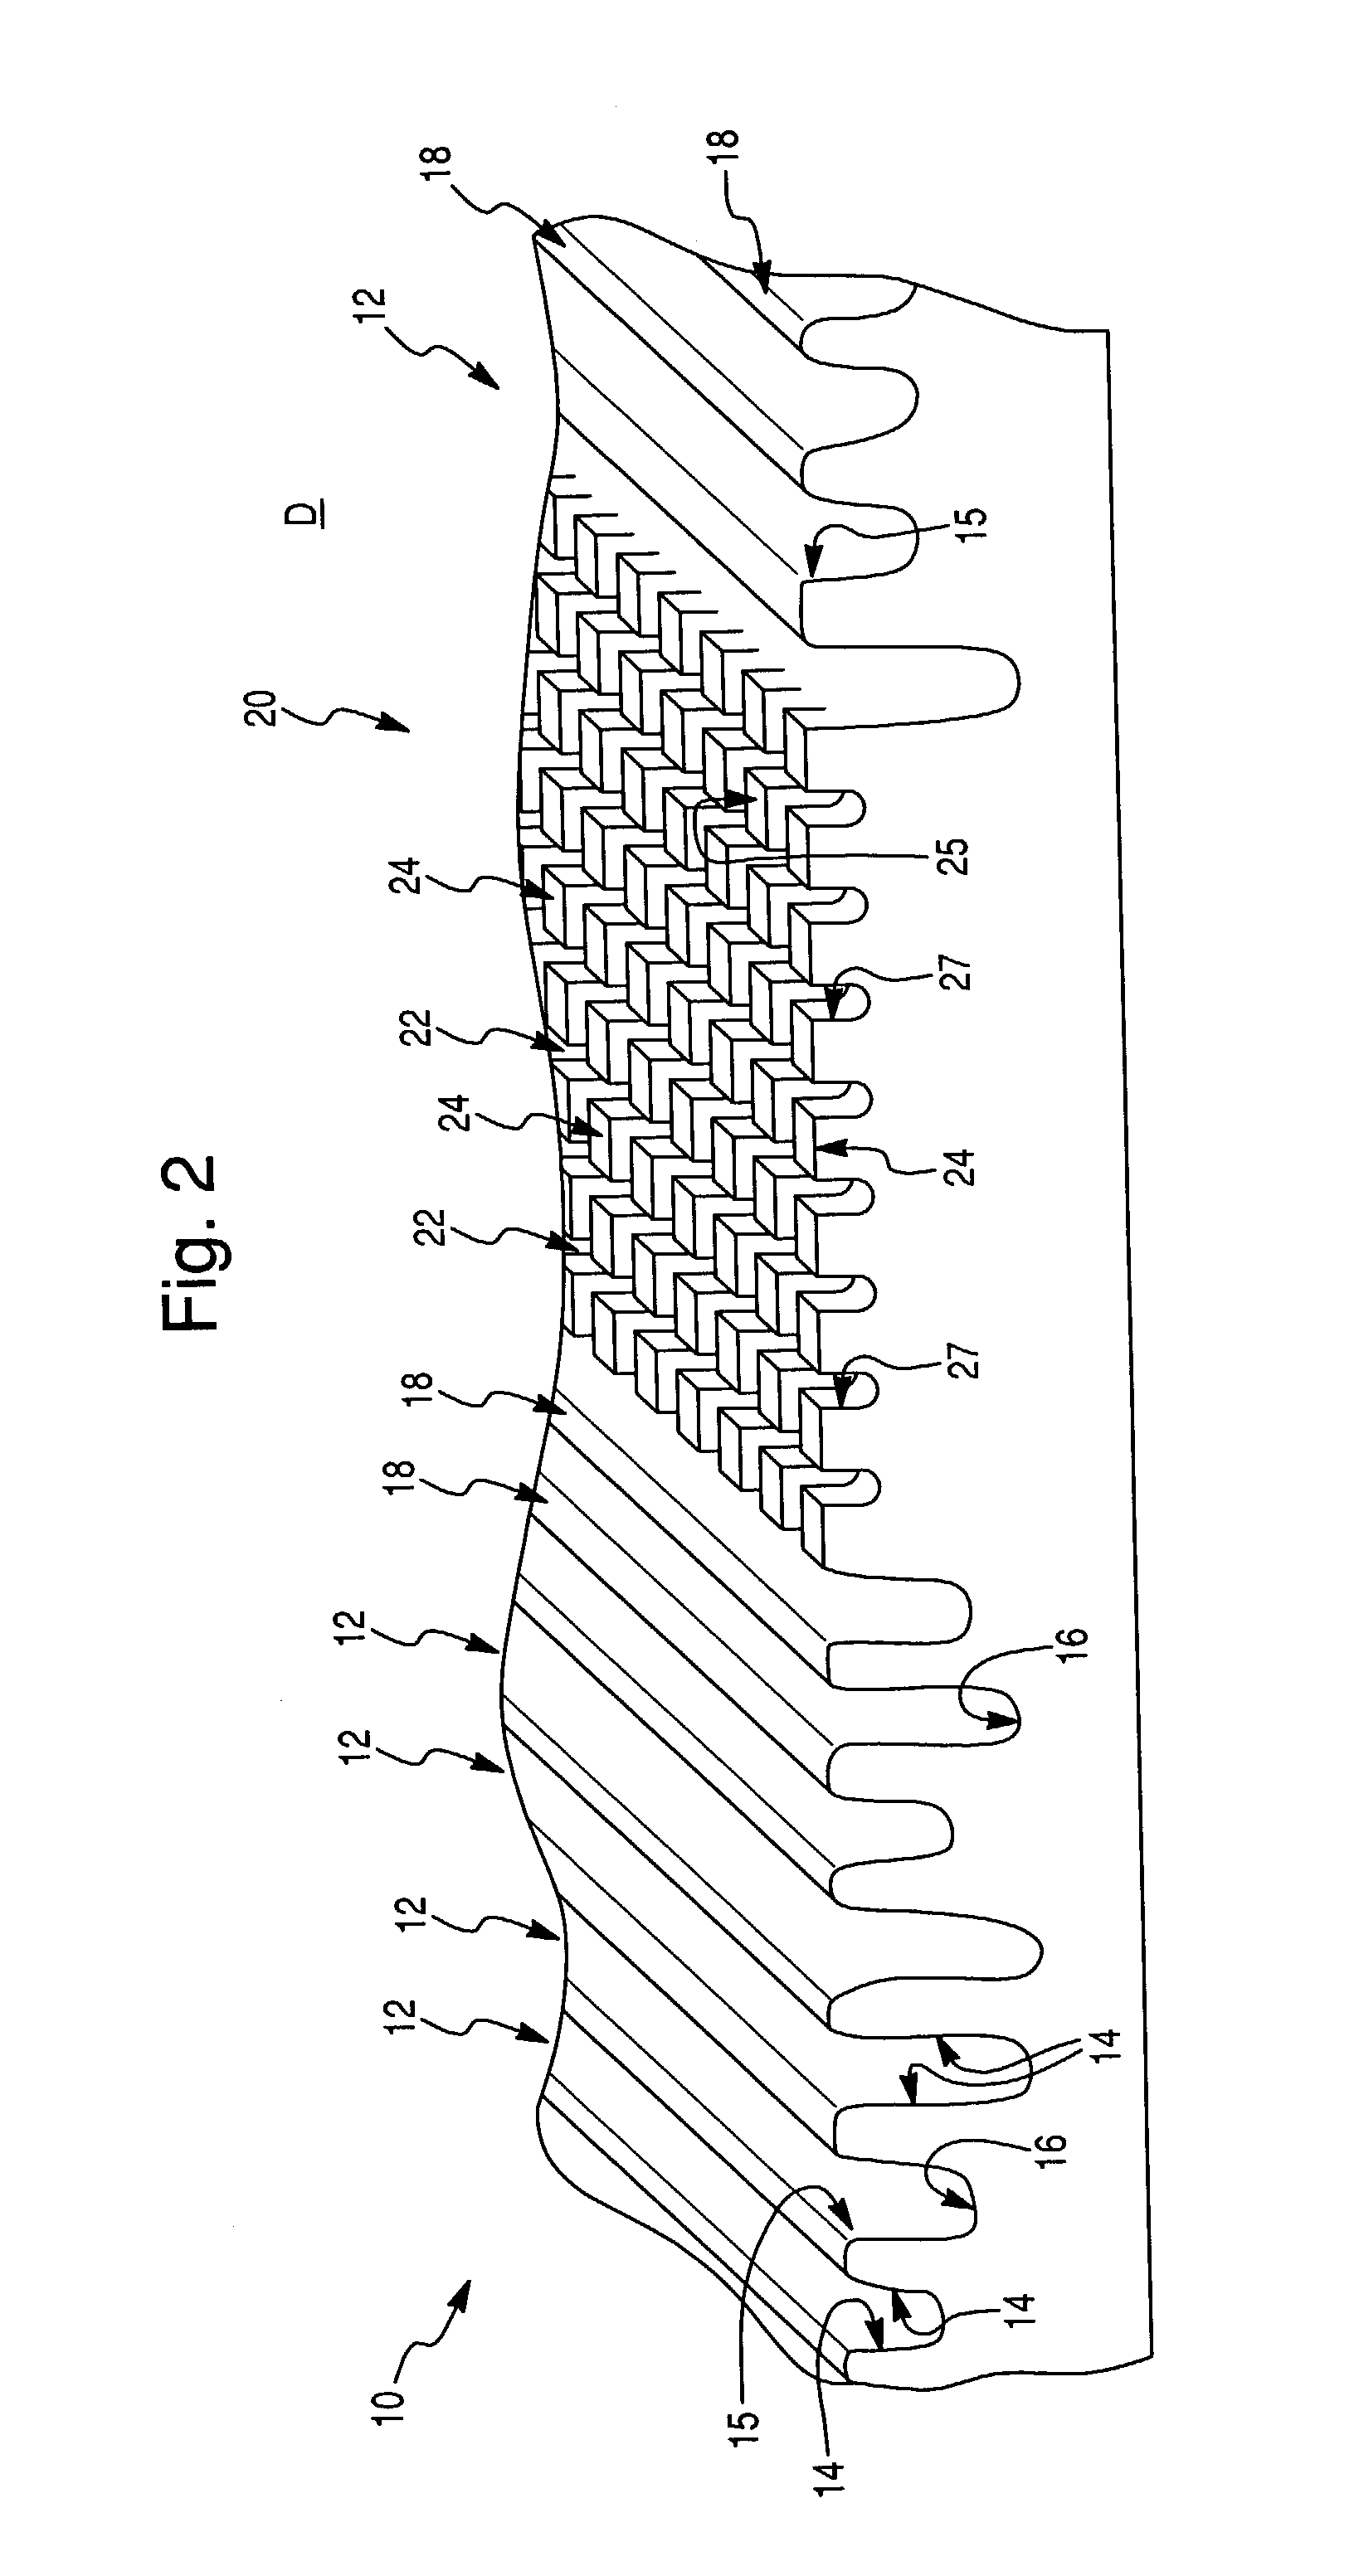 Door skin, a method of etching a plate for forming a wood grain pattern in the door skin, and an etched plate formed therefrom